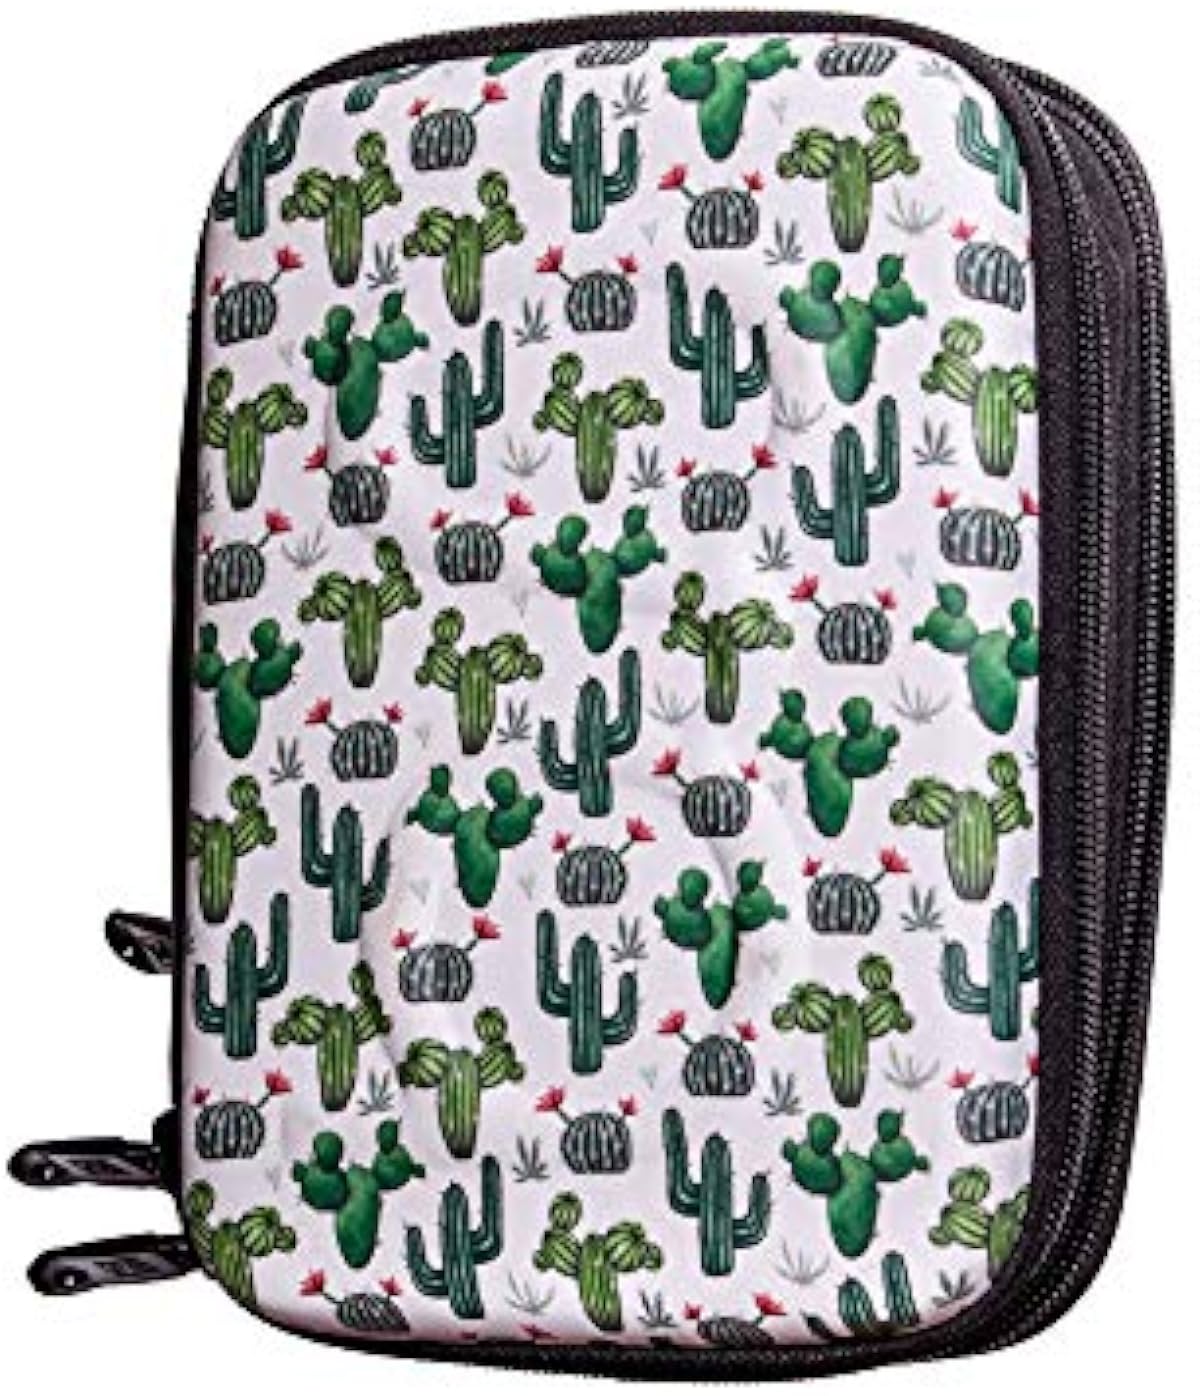 Glucology Diabetic Travel Case - Organizer for Blood Sugar Test Strips, Medication, Glucose Meter, Pills, Tablets, Pens, Insulin Syringes, Needles, Lancets (Cactus, Classic)